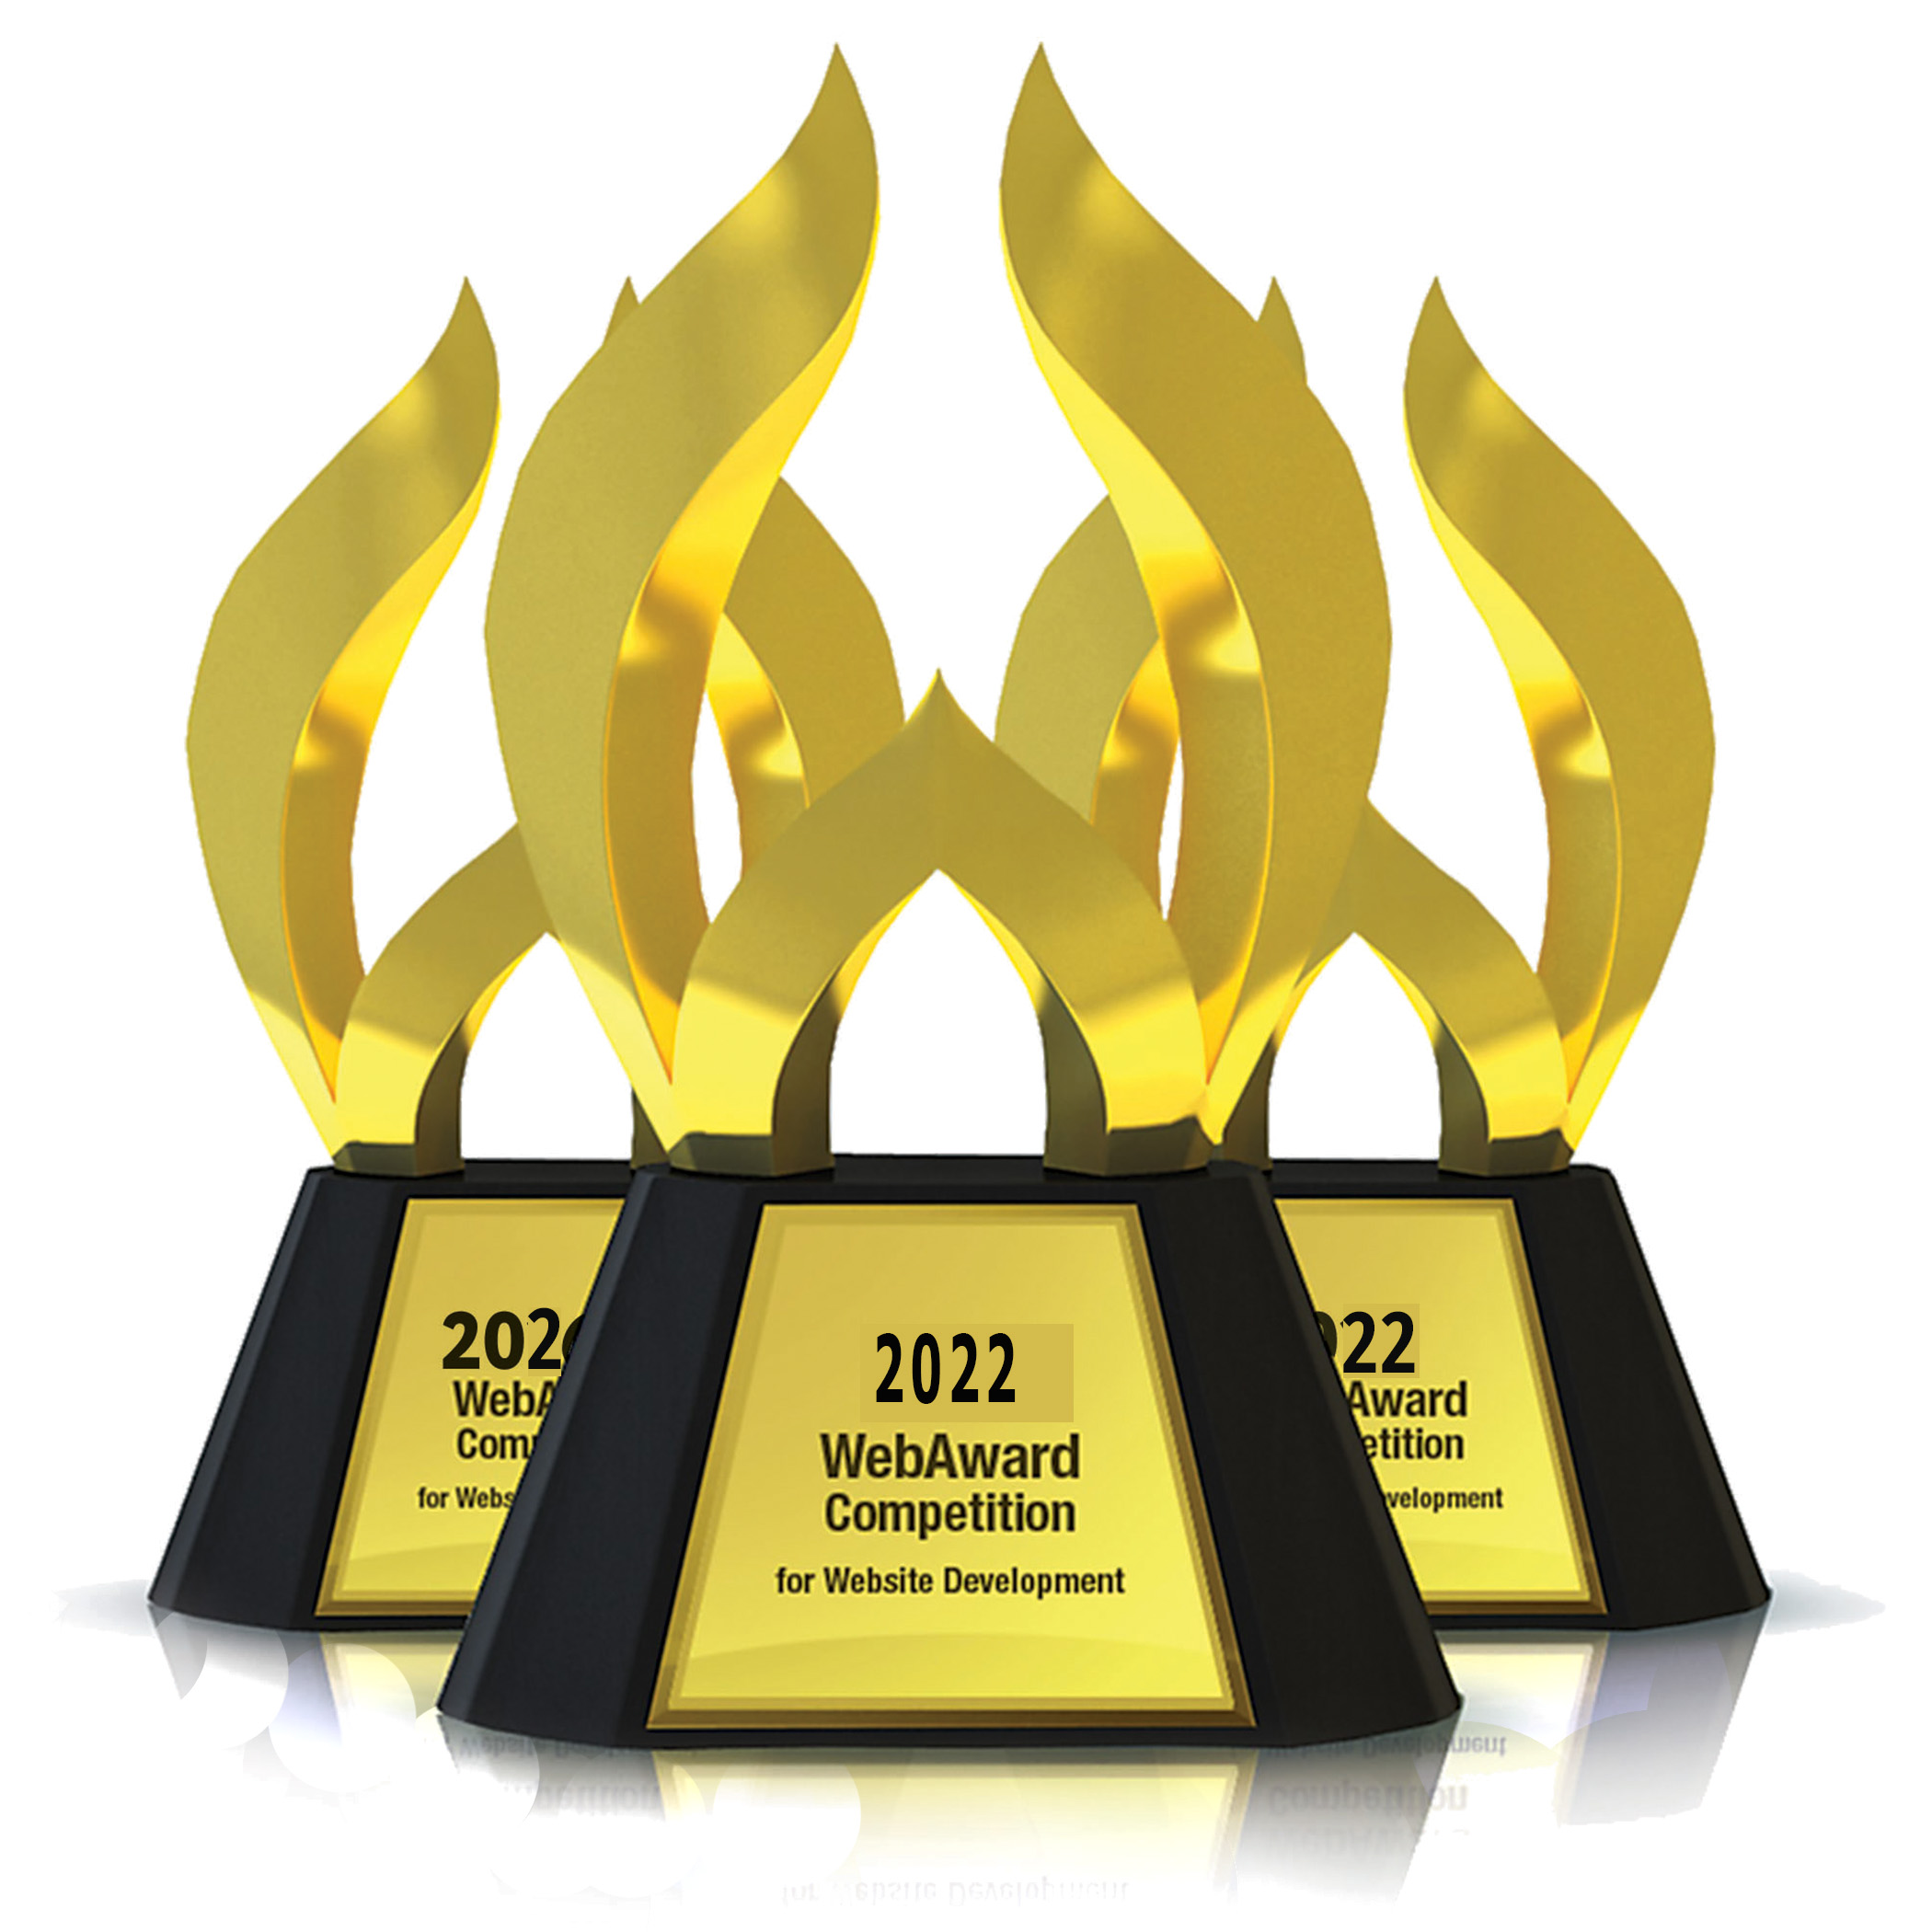 Best Restaurant Web Site to be Named by Web Marketing Association in 26th Annual WebAward Competition